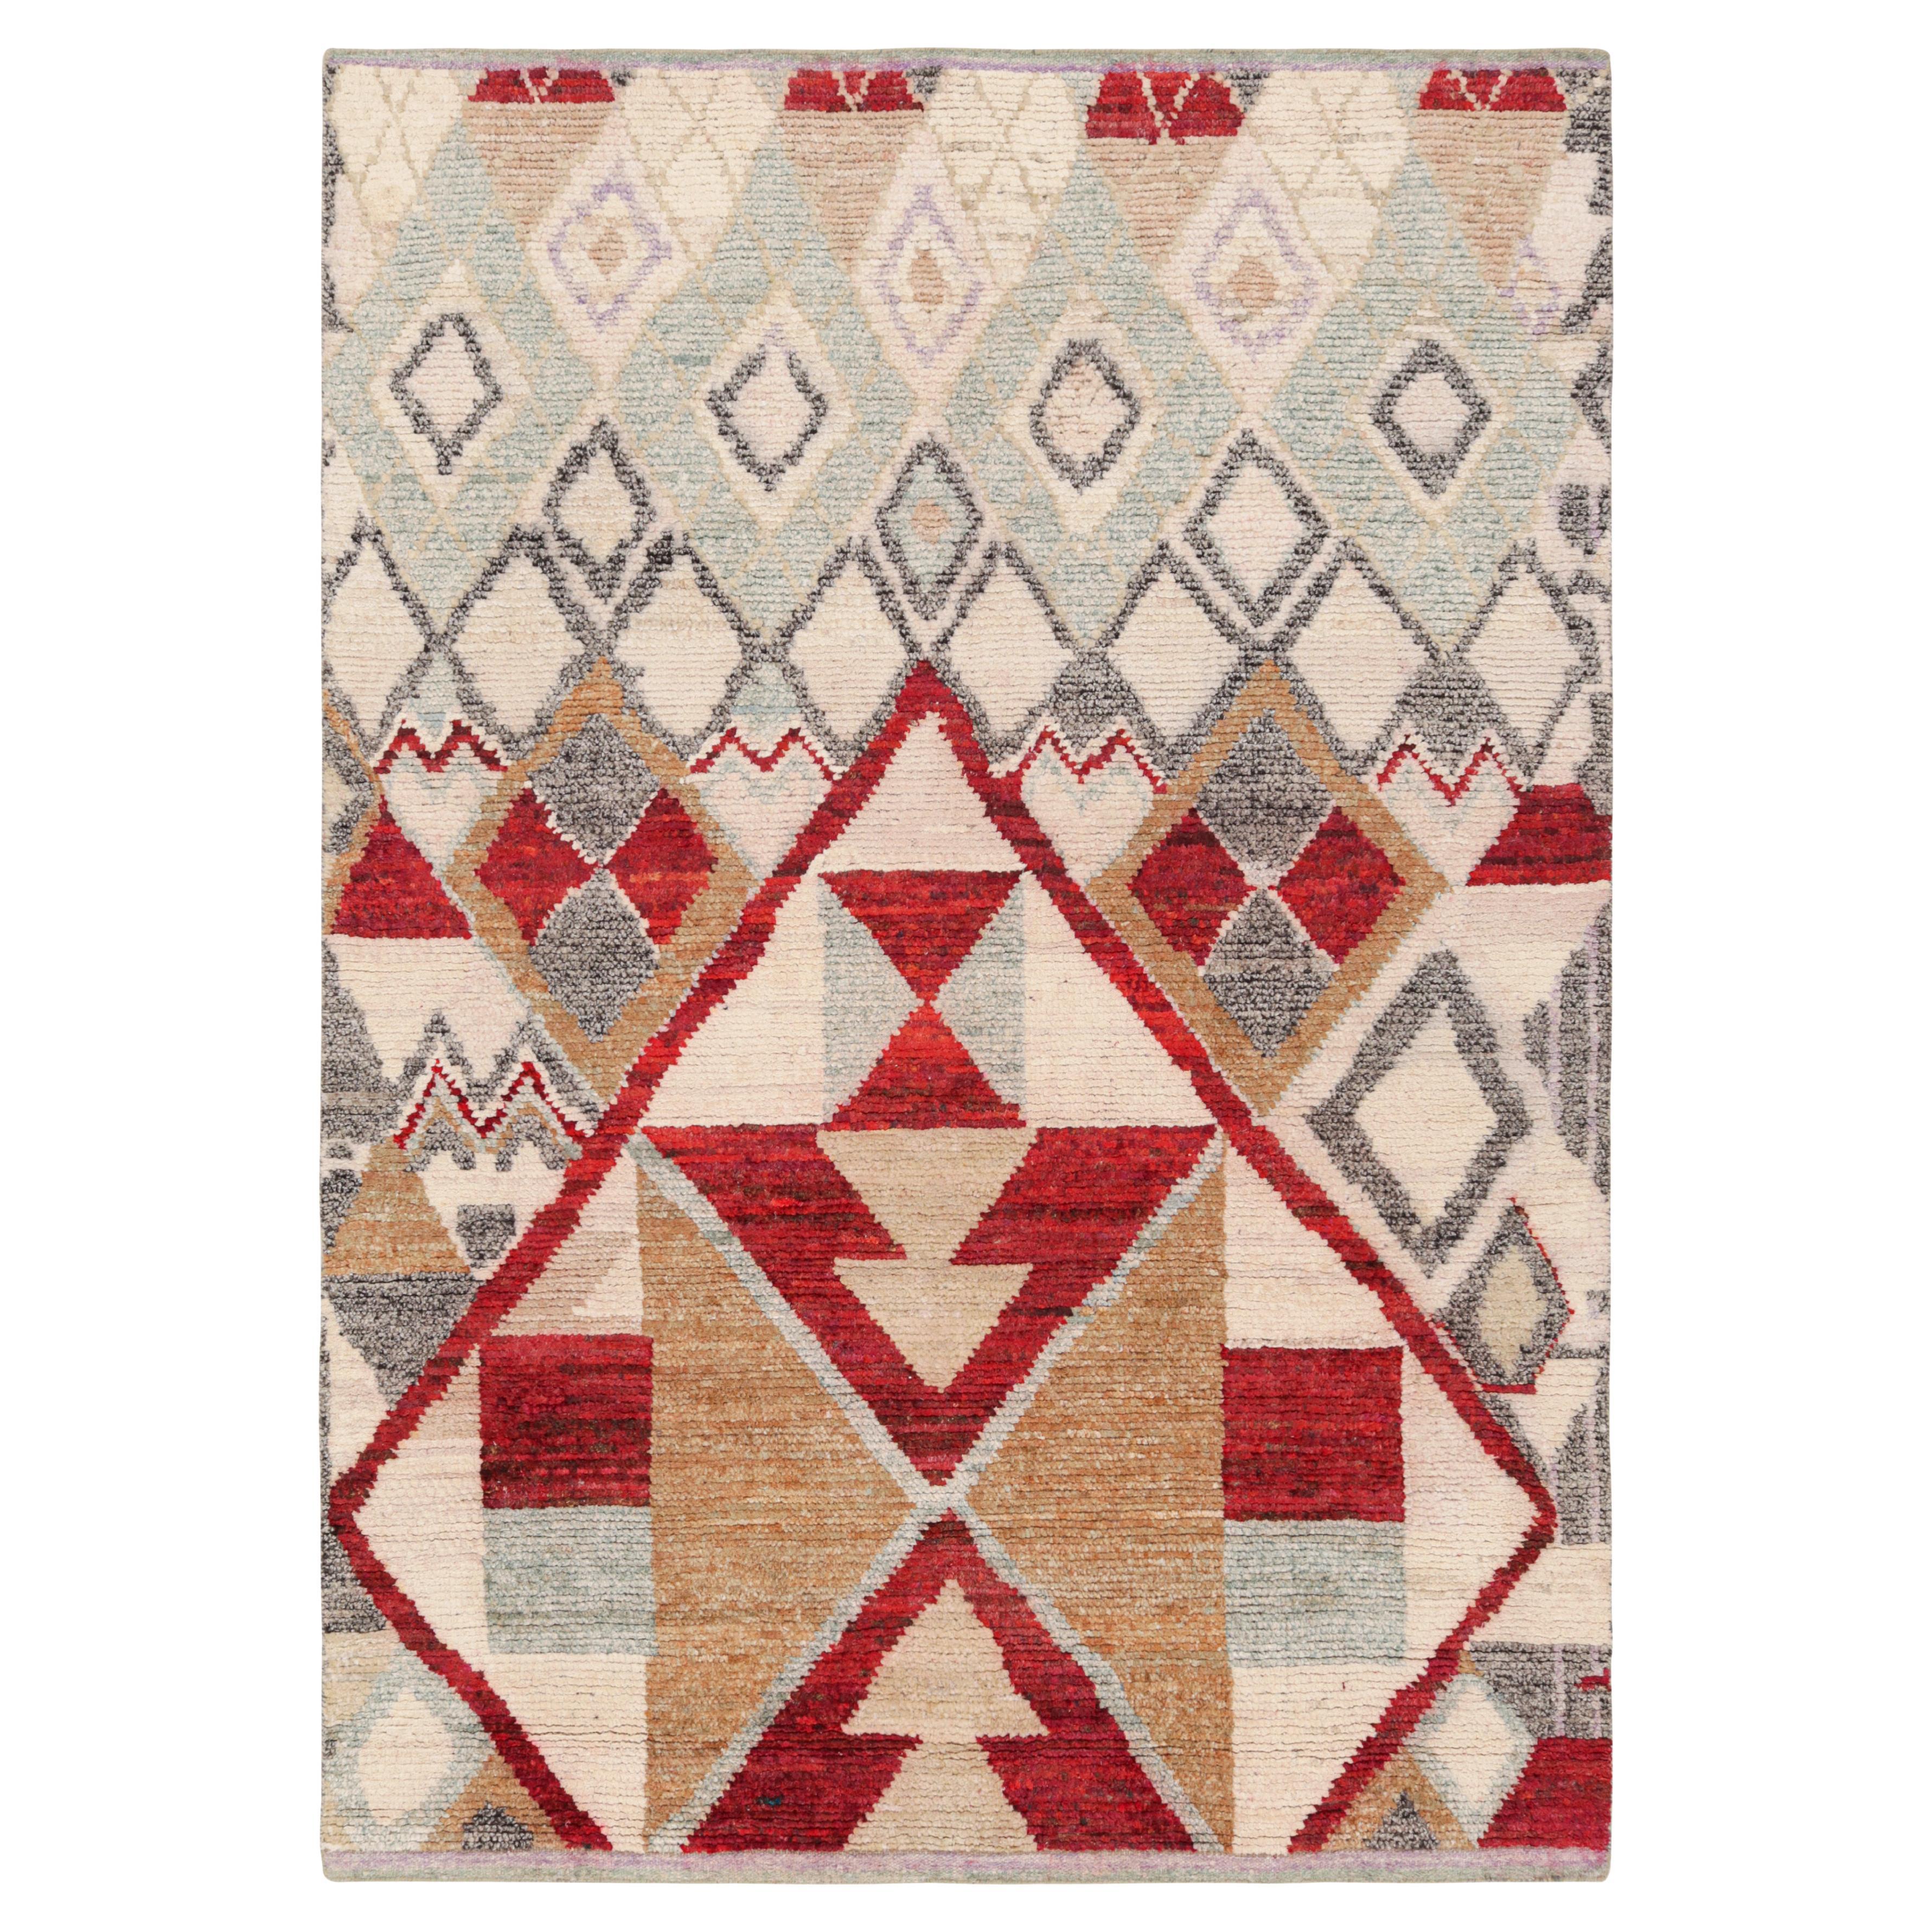 Rug & Kilim's Contemporary Moroccan Style Rug Polychromatic Geometric Patterns